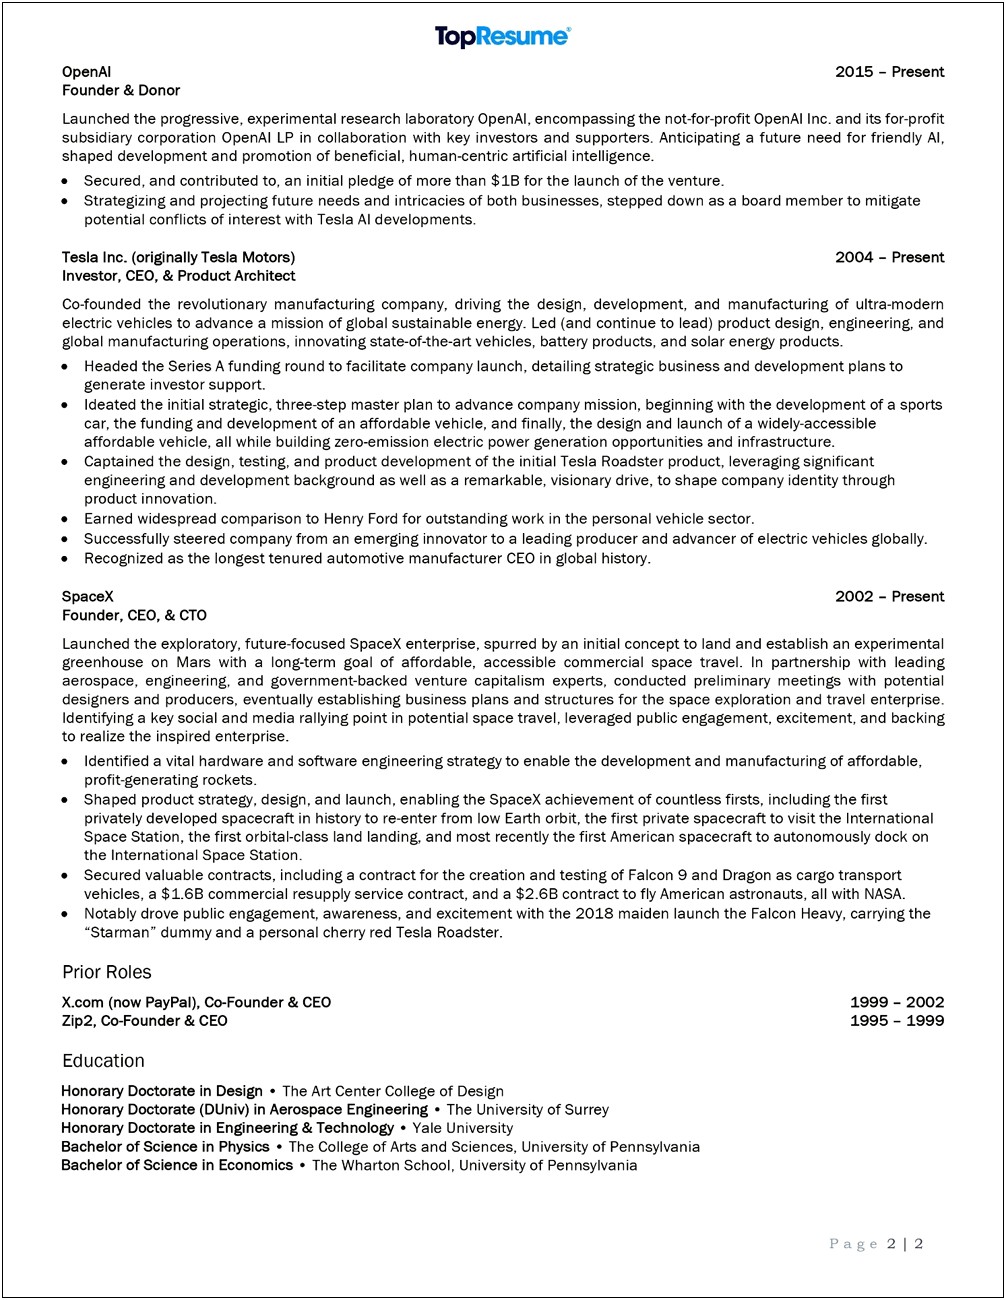 Sample Resume For Space X